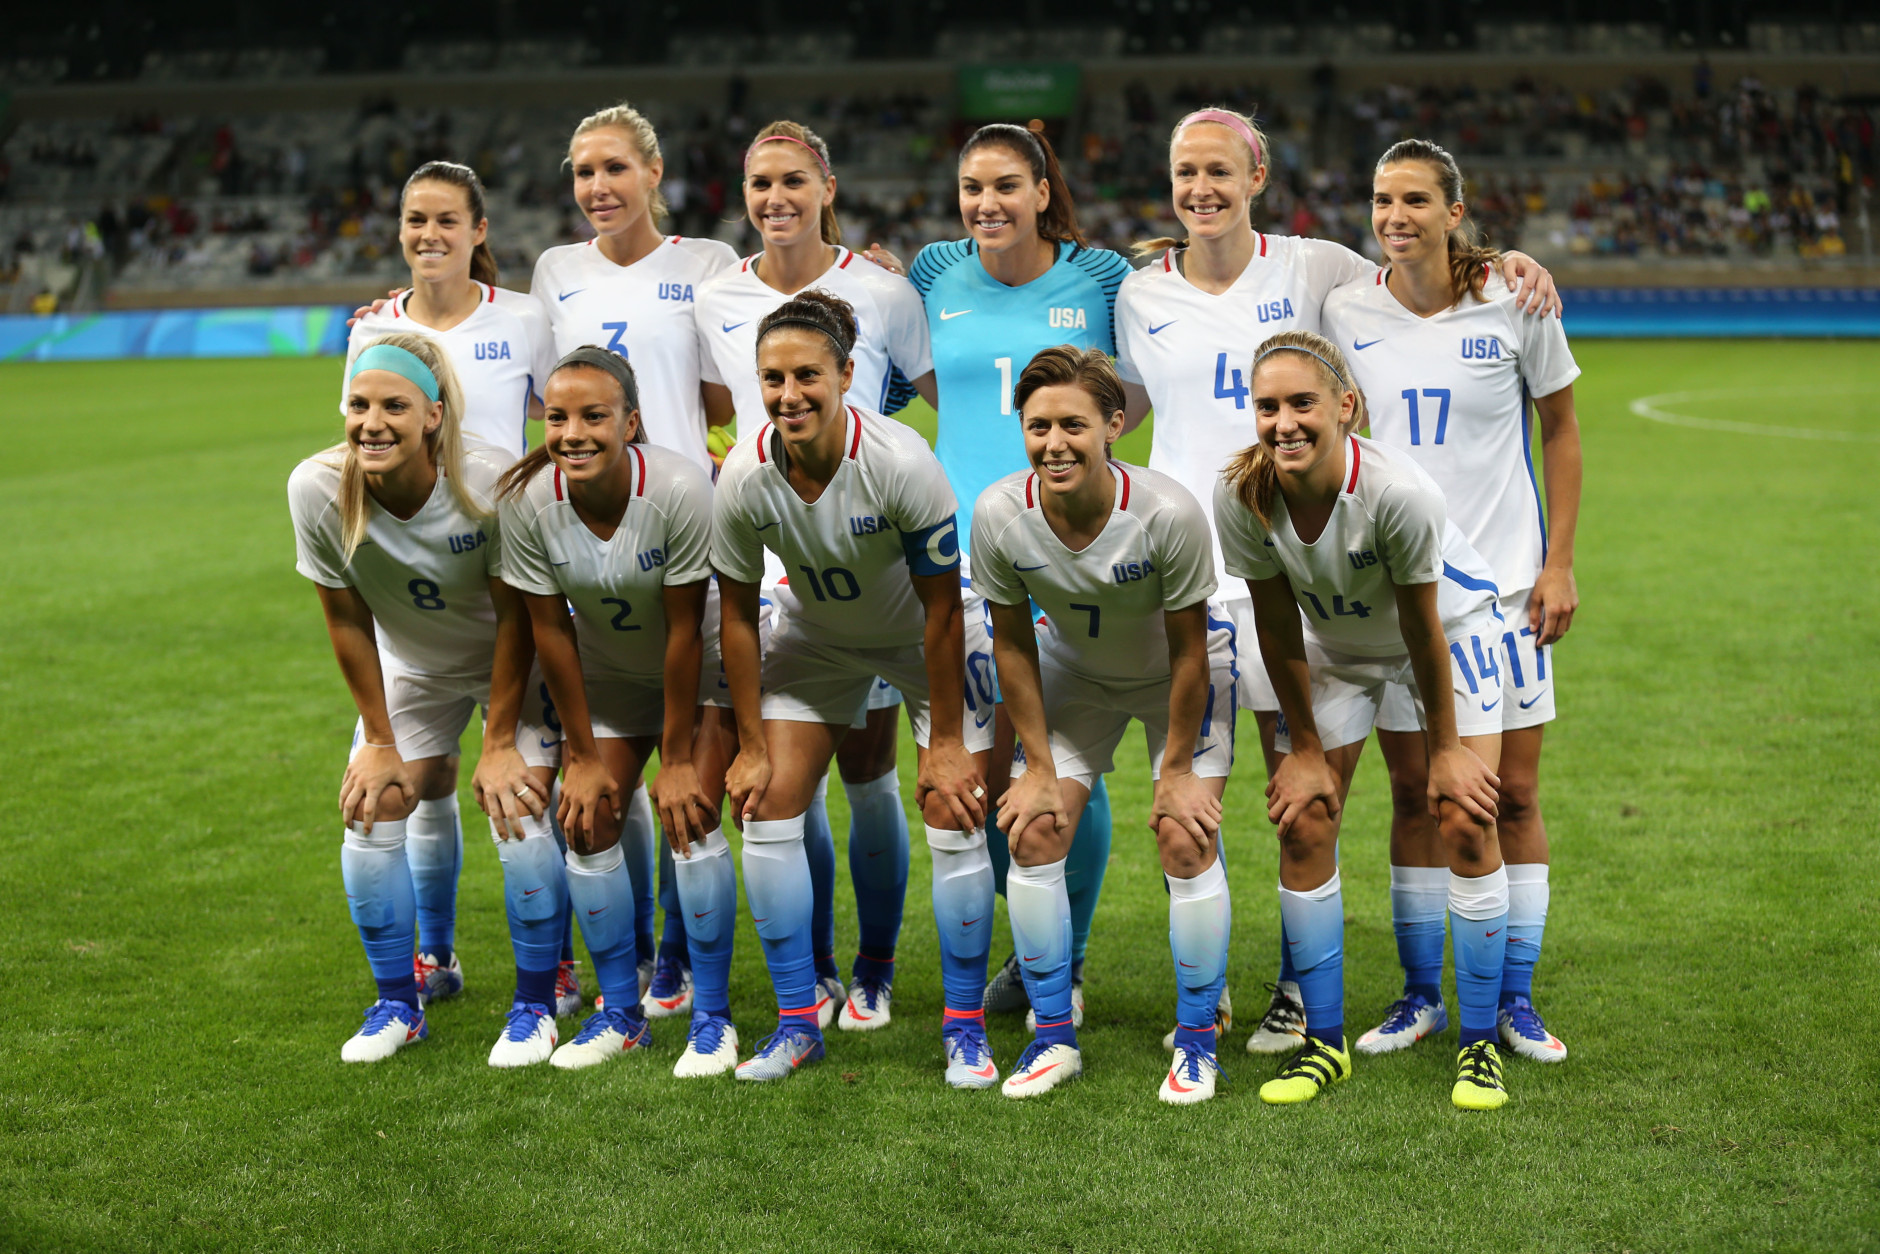 The United States Women's Olympic Football team poses for photos prior to a match against New Zealand during a Women's Olympic Football Tournament match at the Mineirao stadium in Belo Horizonte, Brazil, Wednesday, Aug. 3, 2016. (AP Photo/Eugenio Savio)